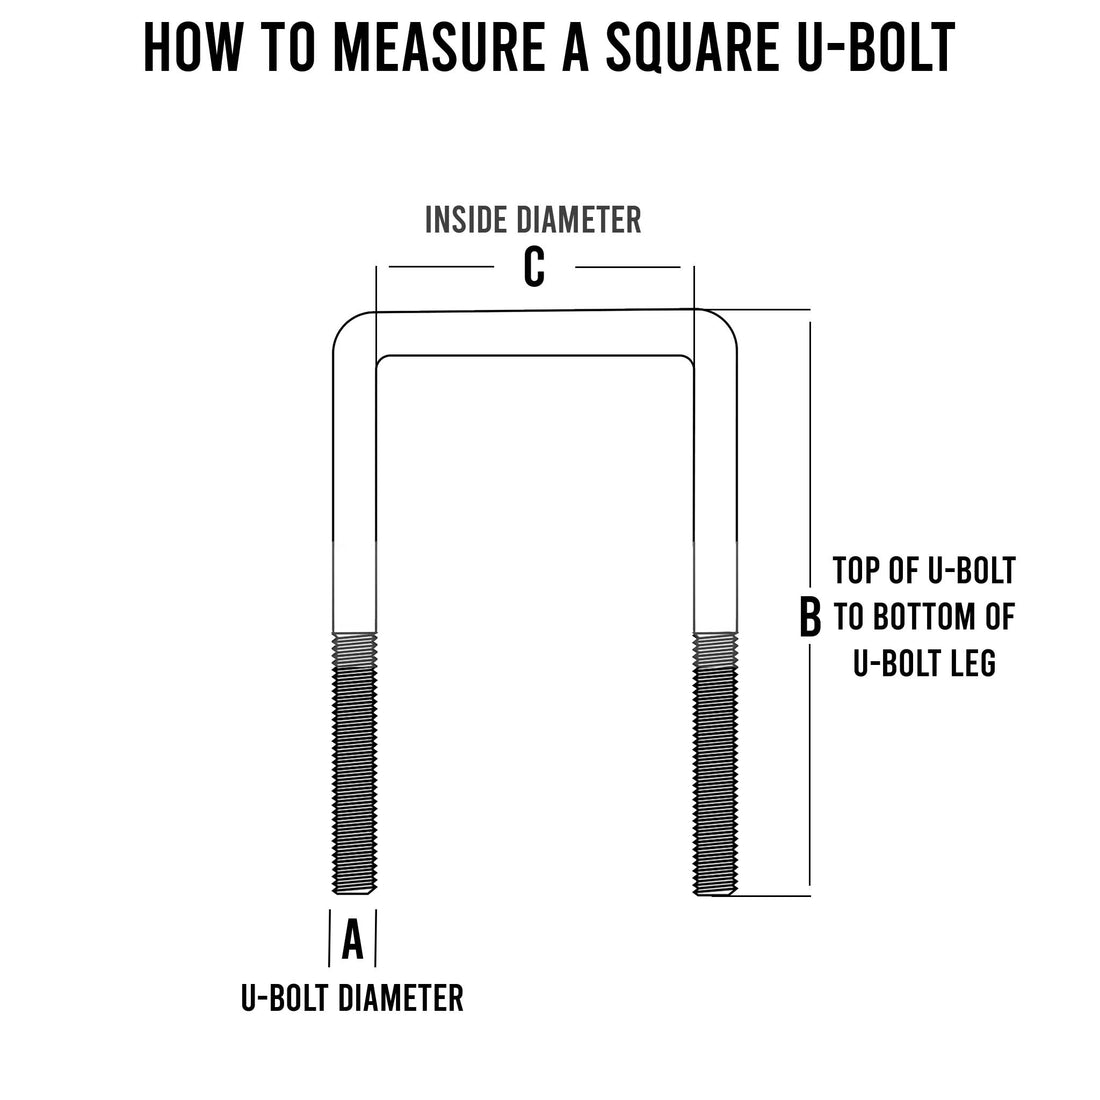 Diagram of how to measure a 3/8 inch square U-bolt.